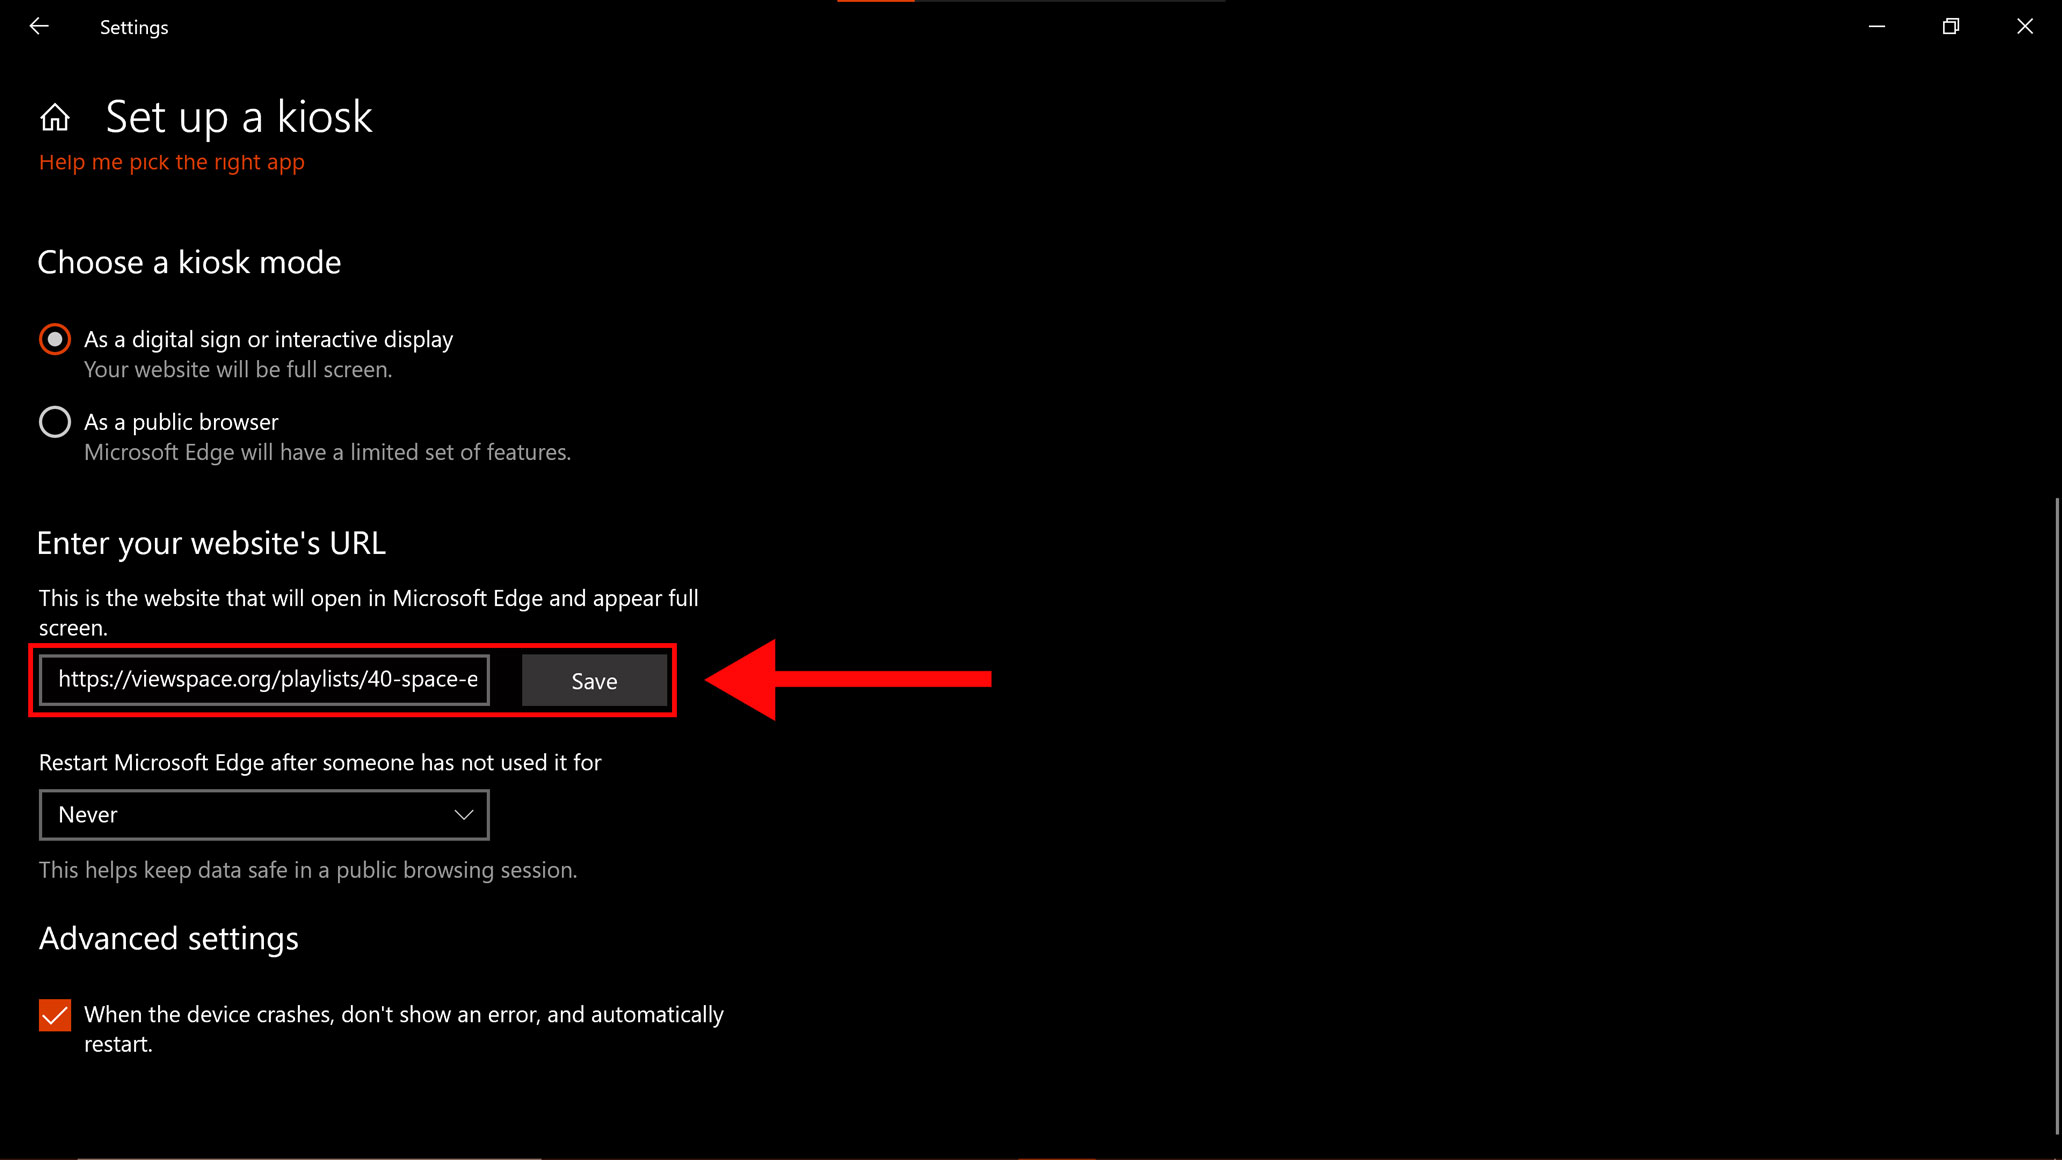 Screenshot of the Windows “Set up a kiosk” window. Just below is the “Choose a kiosk mode” section, which lists two options. The first option - “As a digital sign or interactive display” - is selected. Further below is the “Enter your website’s URL” section, which has two text entry boxes. A large red arrow points to the first box - "This is the website that will open in Microsoft Edge and appear full screen." - which has text entered that reads “ViewSpace URL Goes Here.”  A red rectangle also highlights this box. The next  "Restart Microsoft Edge after someone has not used it for" text box has “12 hours” selected from the drop-down menu. At the bottom of the screen, beneath “Advanced settings" the "When the device crashes, don't show an error, and automatically restart" checkbox is selected.